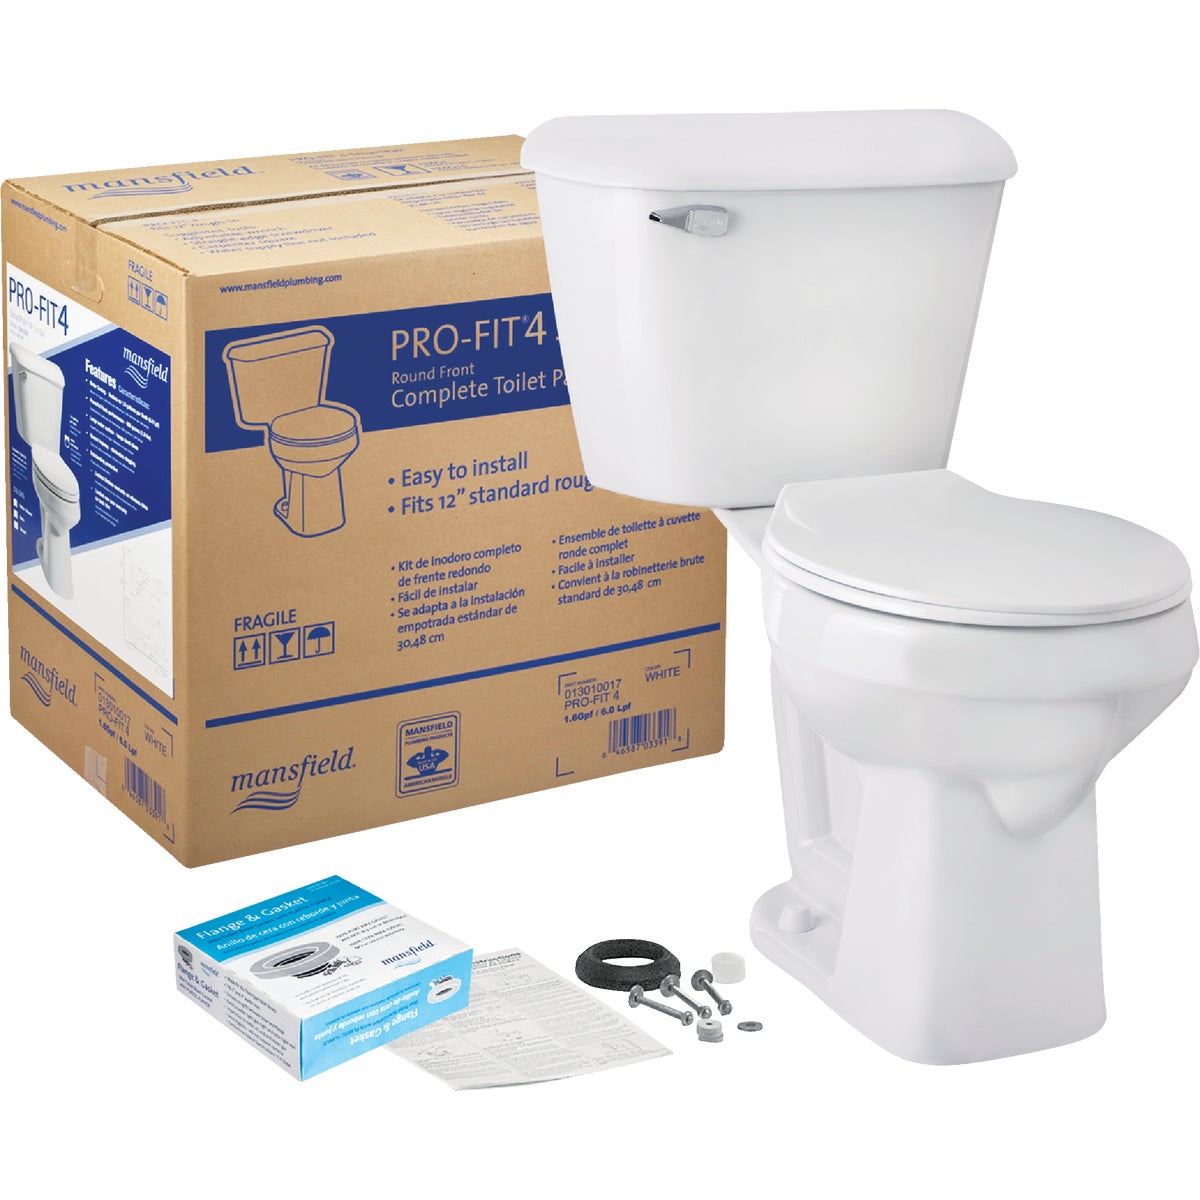 Mansfield Pro-Fit 4 SmartHeight Round Bowl 1.28 GPF Complete Toilet Kit